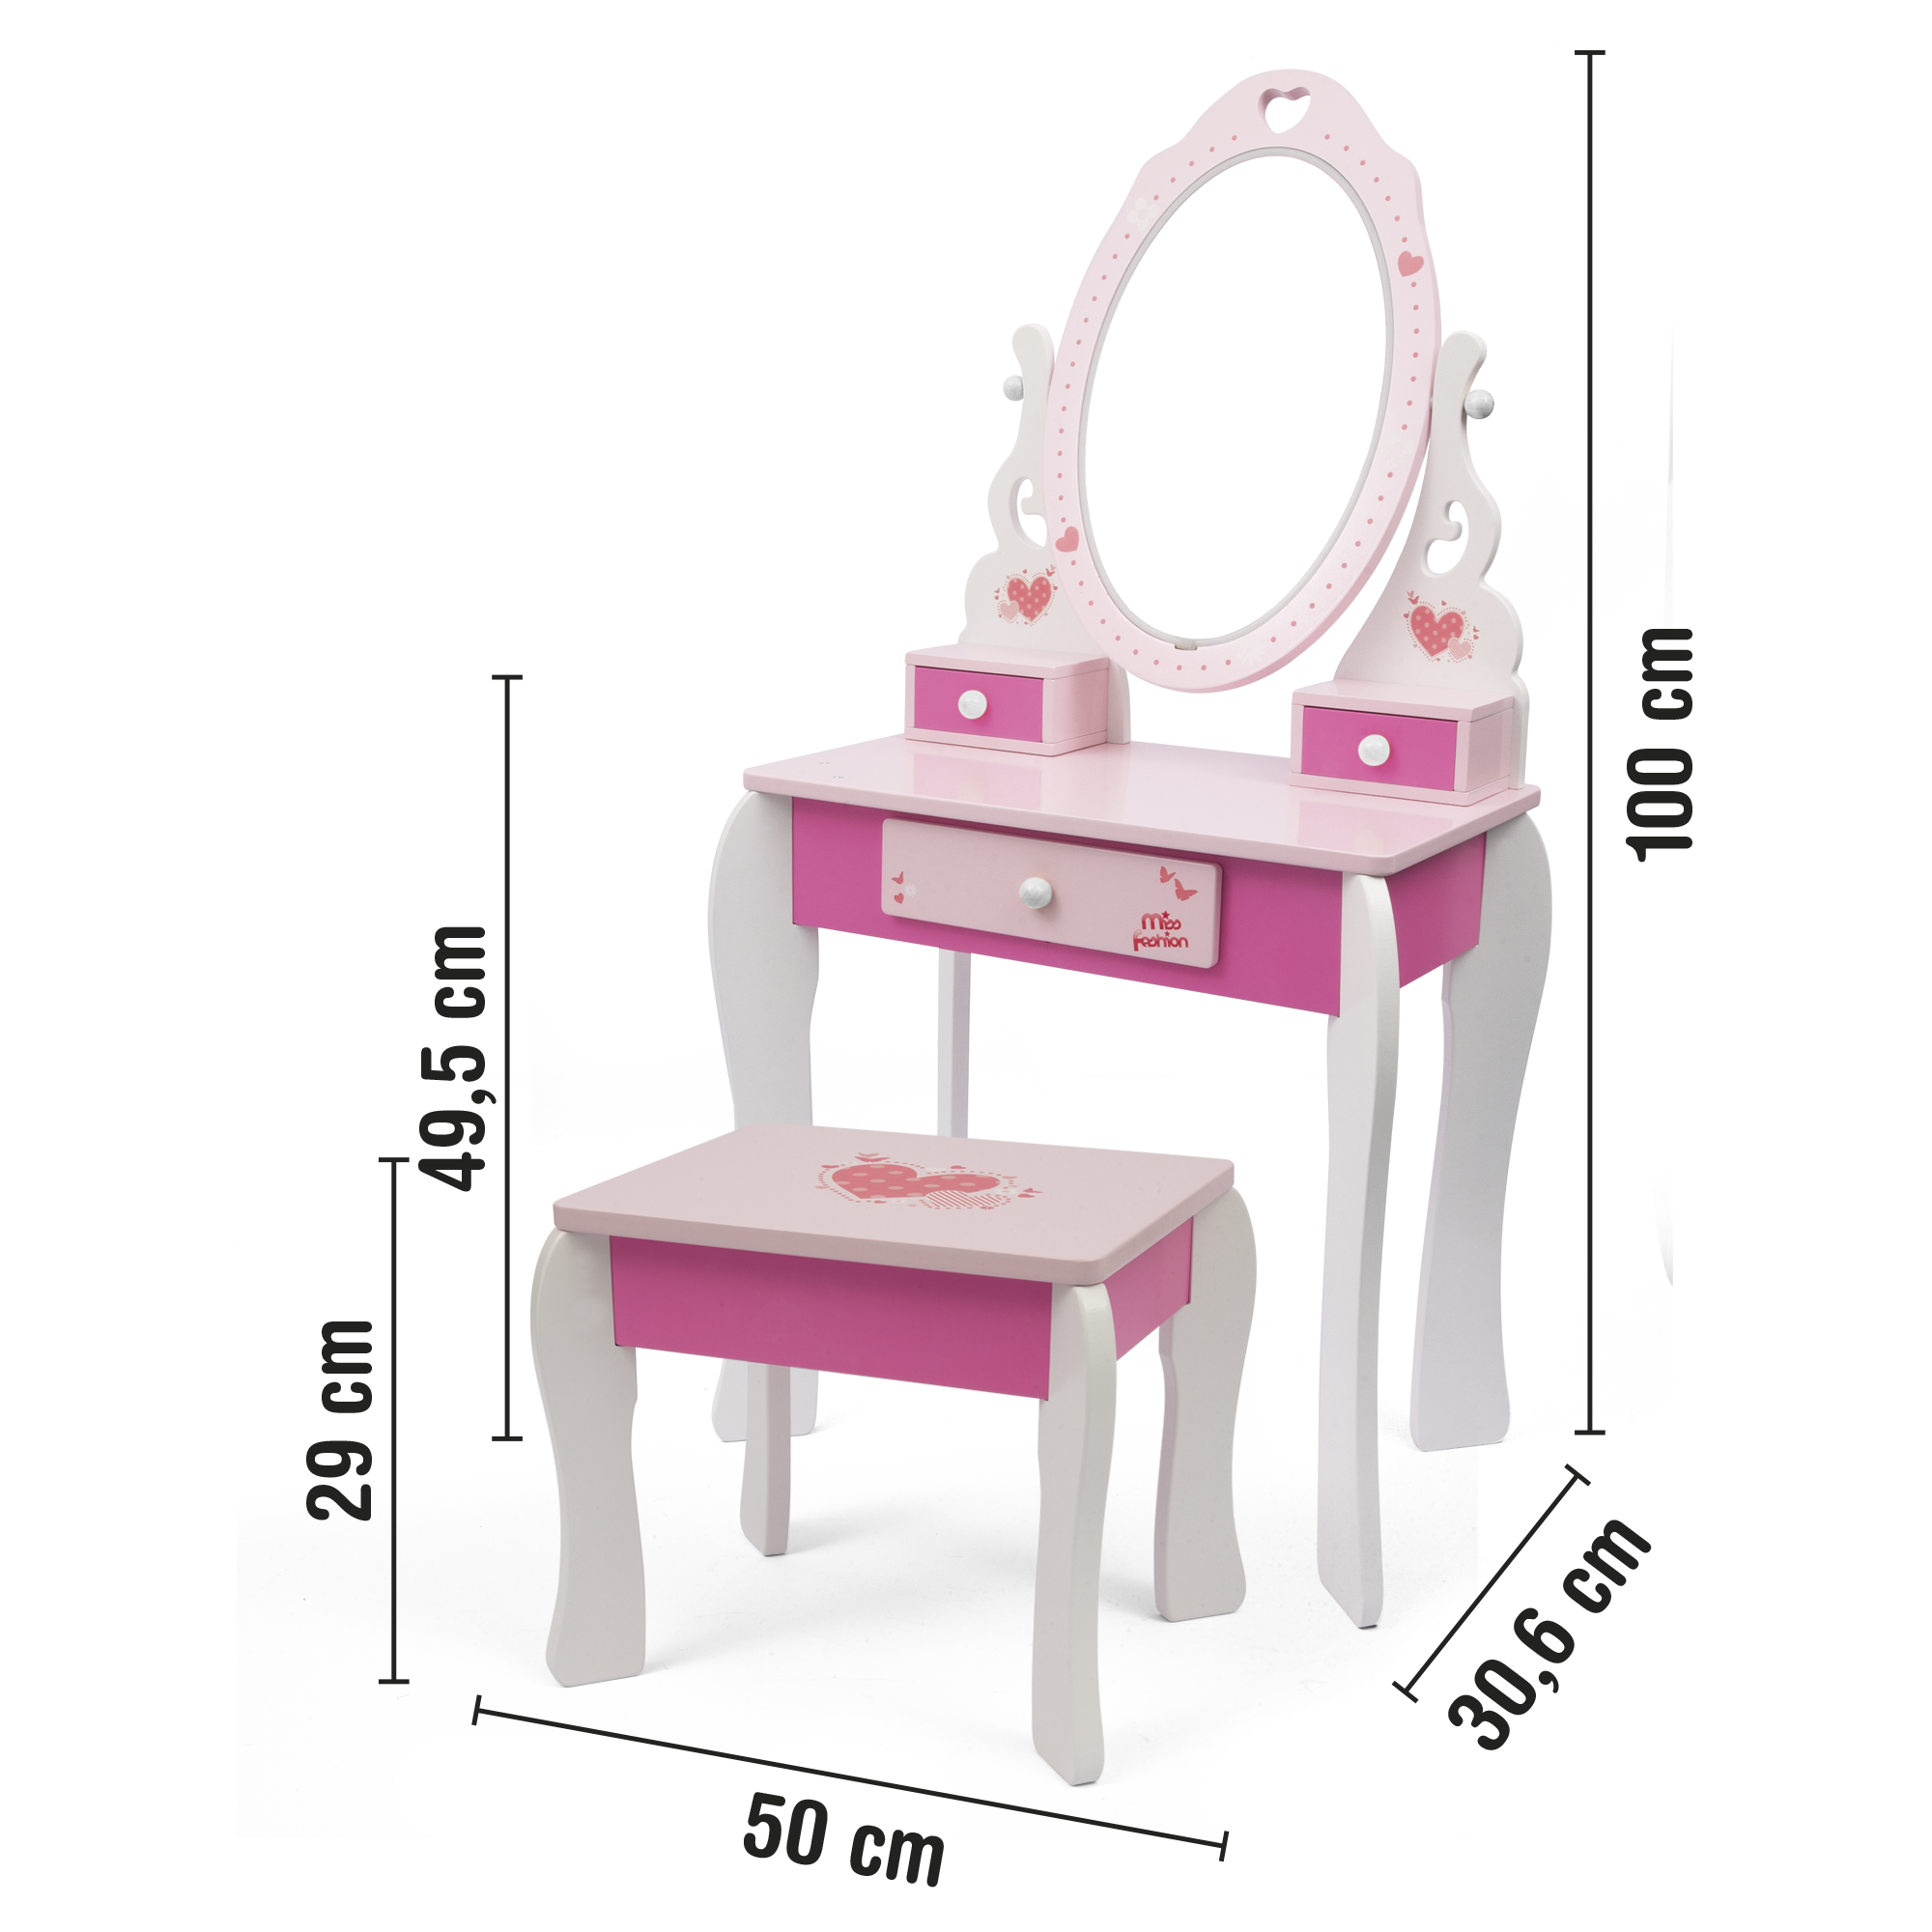 Vanity table con luci led - MISS FASHION